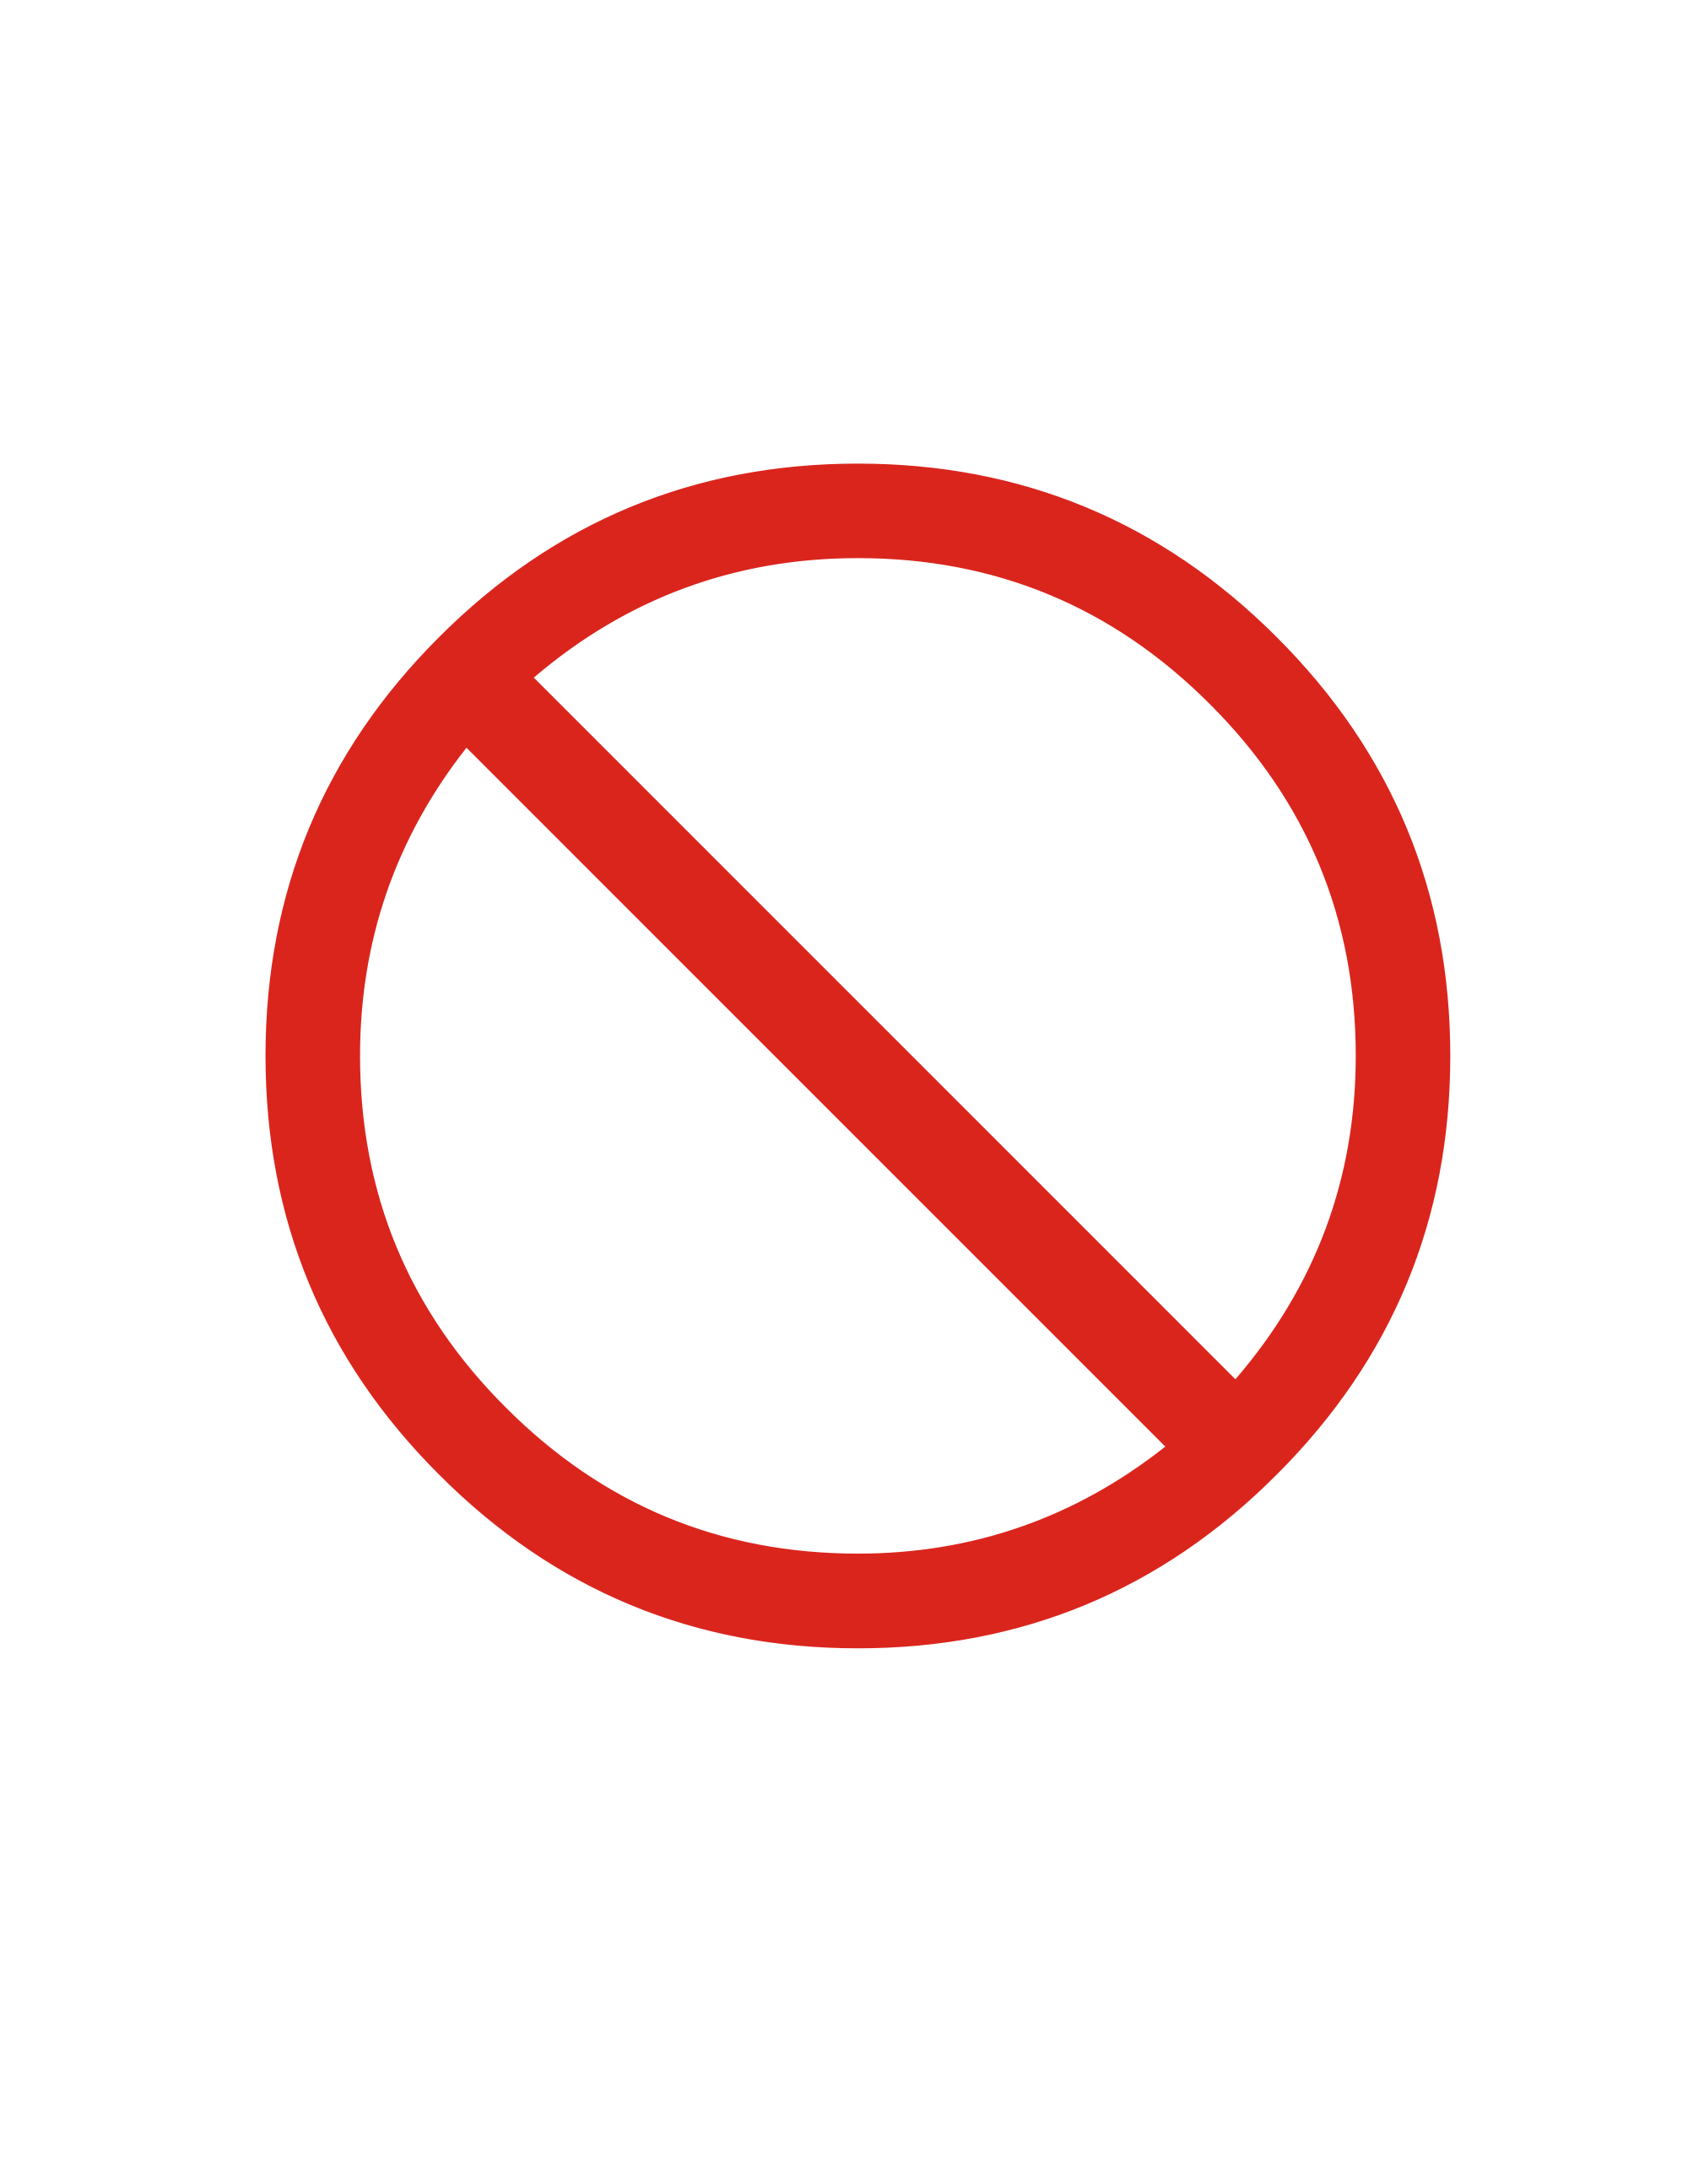 Free Prohibited Sign Transparent, Download Free Prohibited Sign Transparent png image, Free ClipArts on Clipart Library